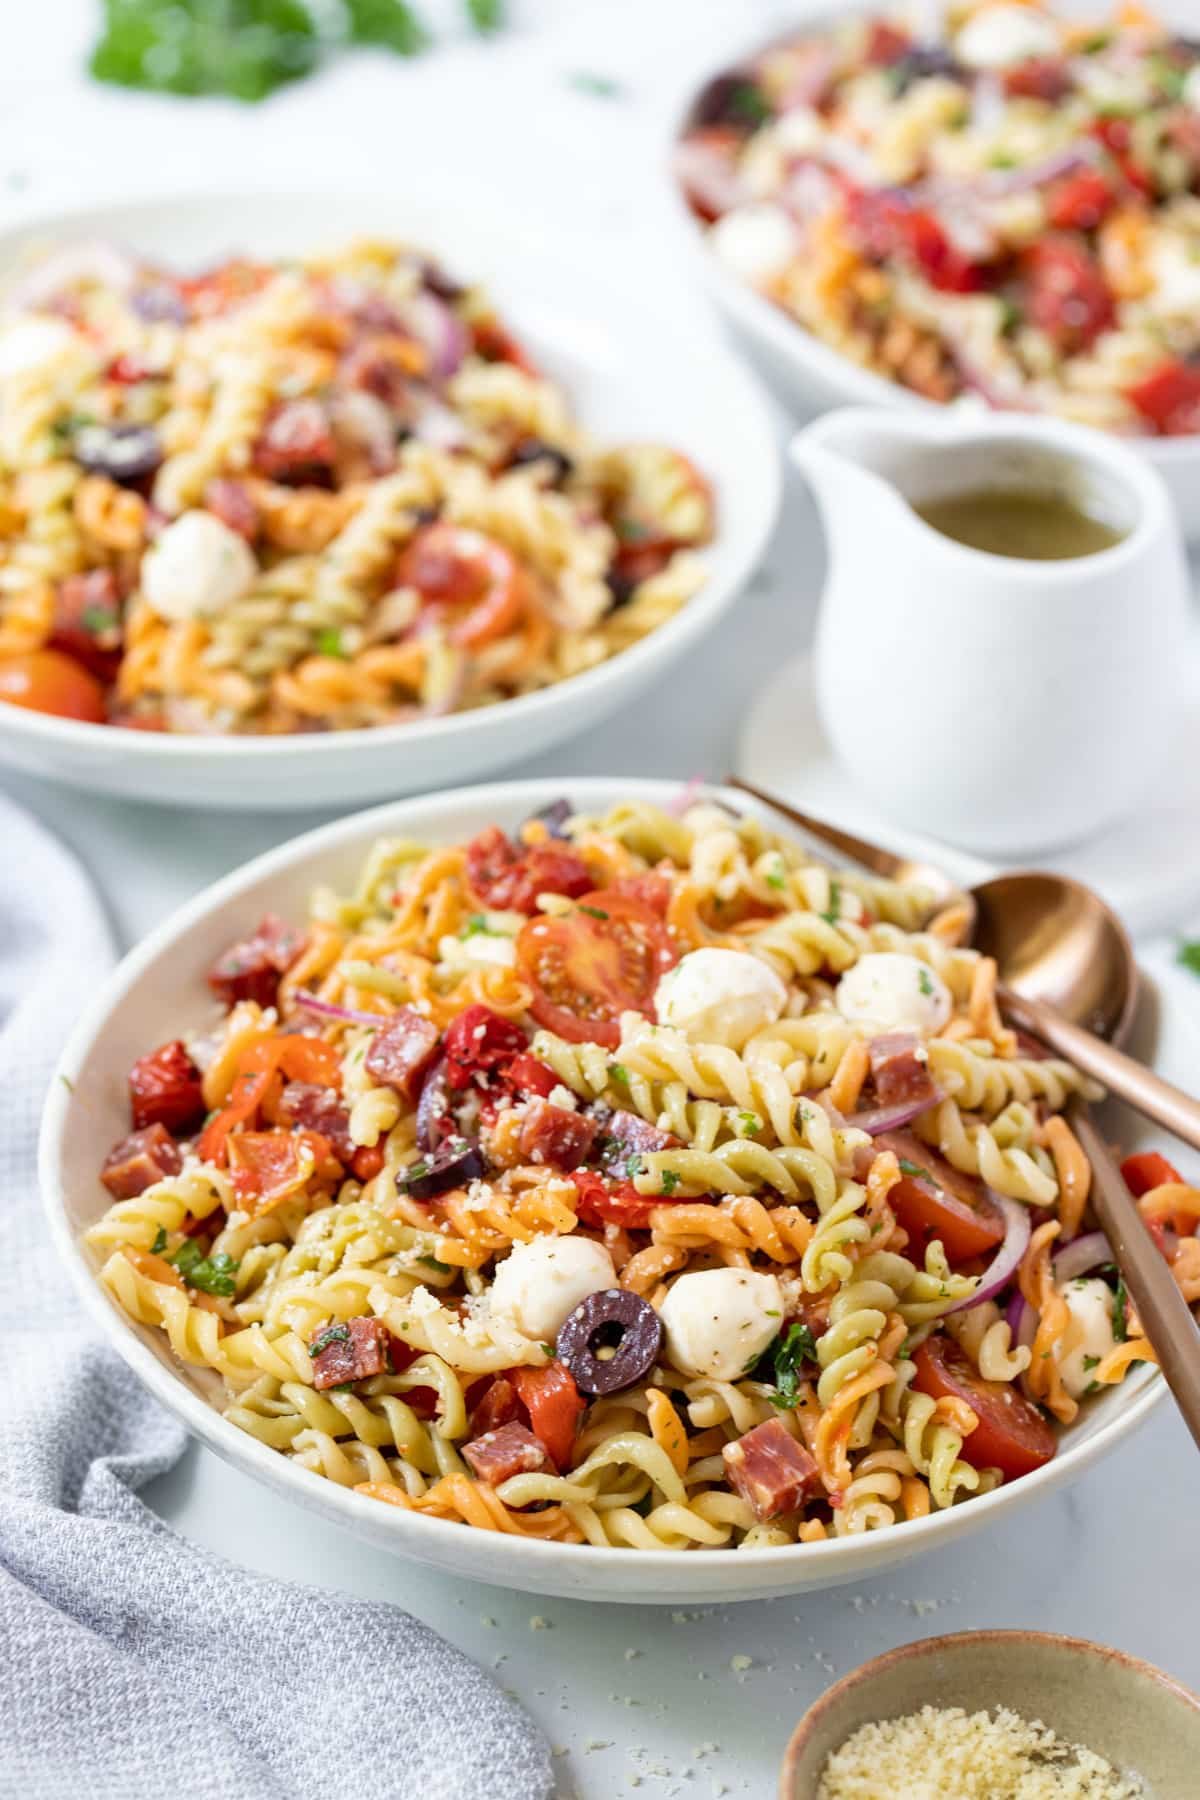 a bowl of pasta salad on a table, topped with salami and vegetables.